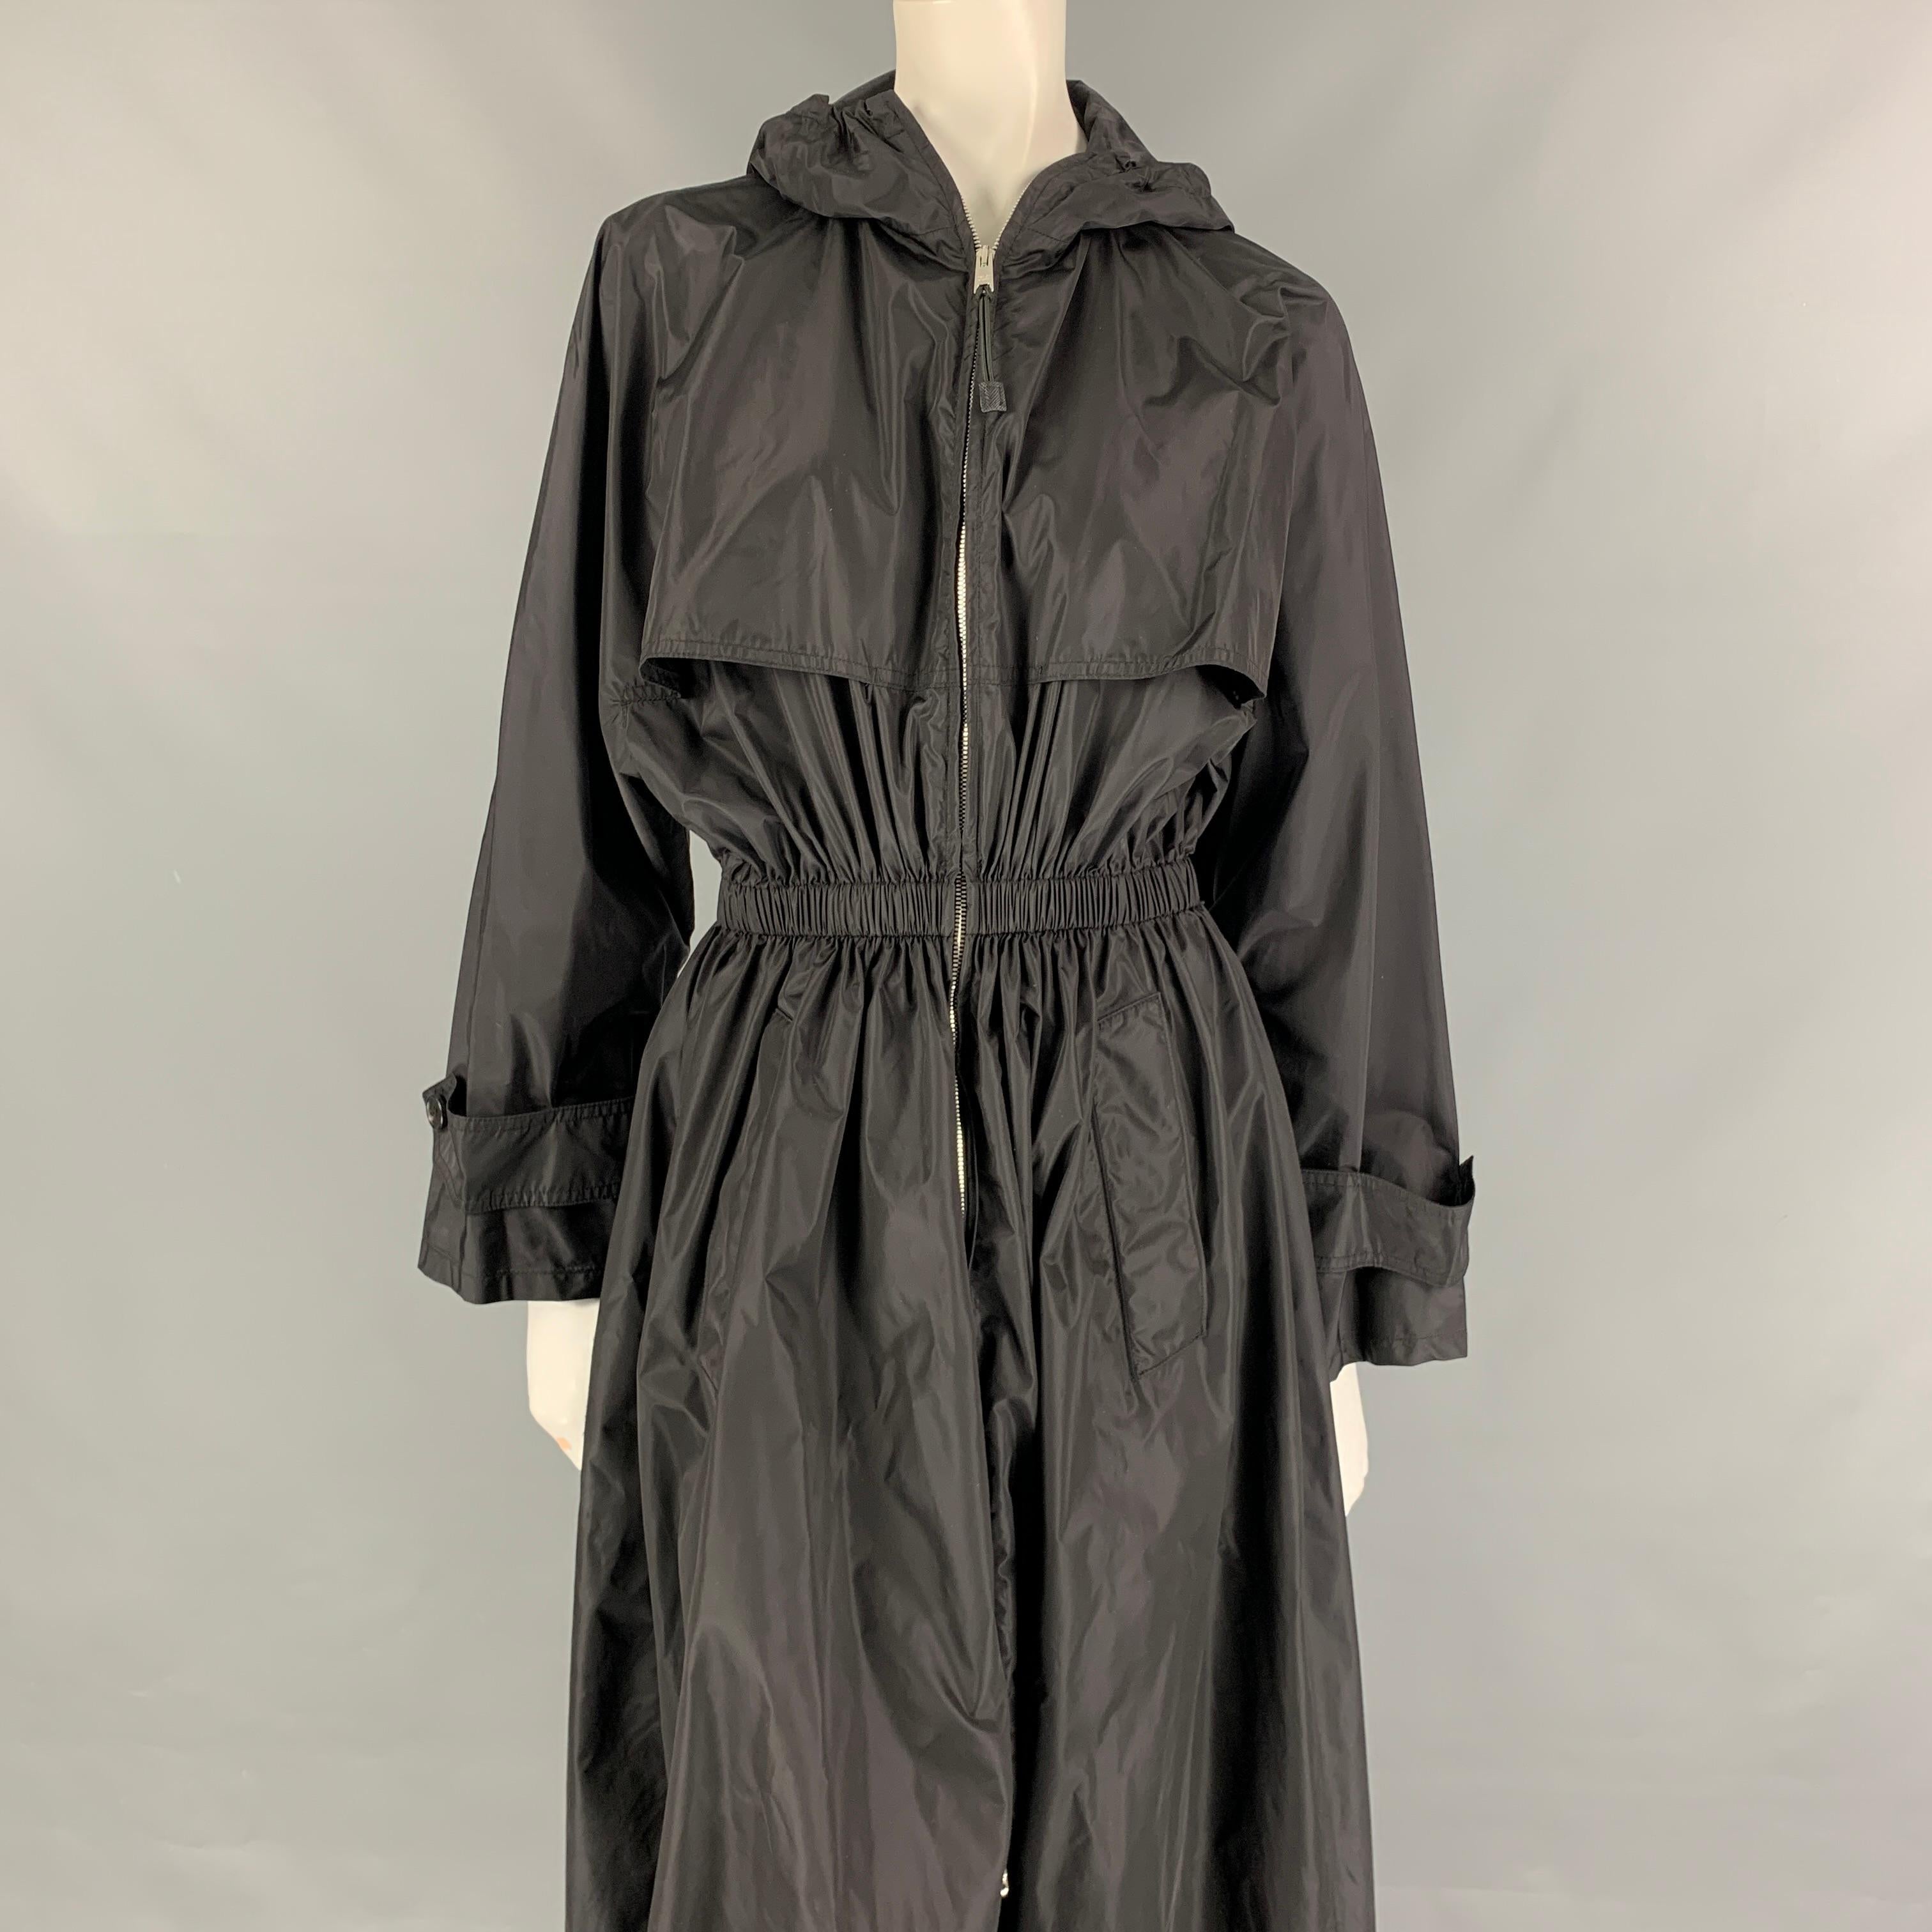 PRADA long coat comes in a black polyamide featuring a hooded style, elastic waistband, slit pockets, and a full zip up closure. Made in Italy. 

Very Good Pre-Owned Condition.
Marked: 38
Original Retail Price: $1,790.00

Measurements:

Shoulder: